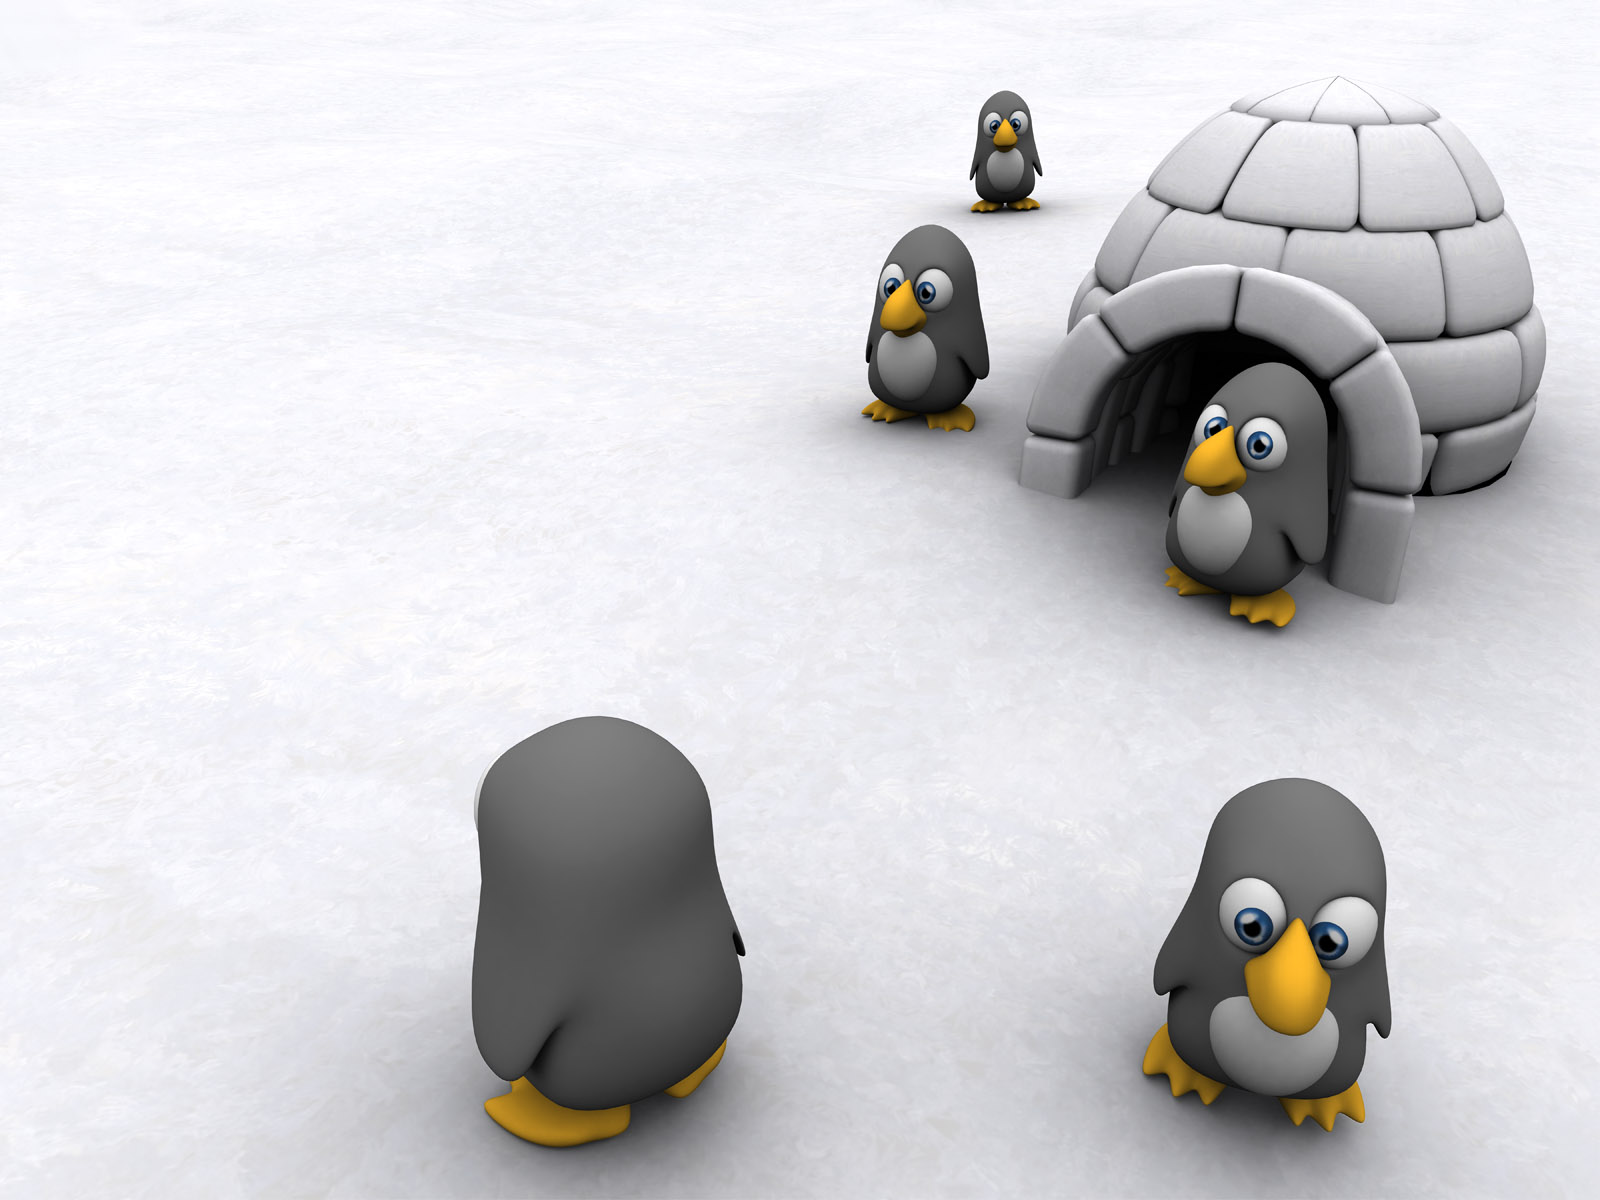 Penguin in front of an igloo.